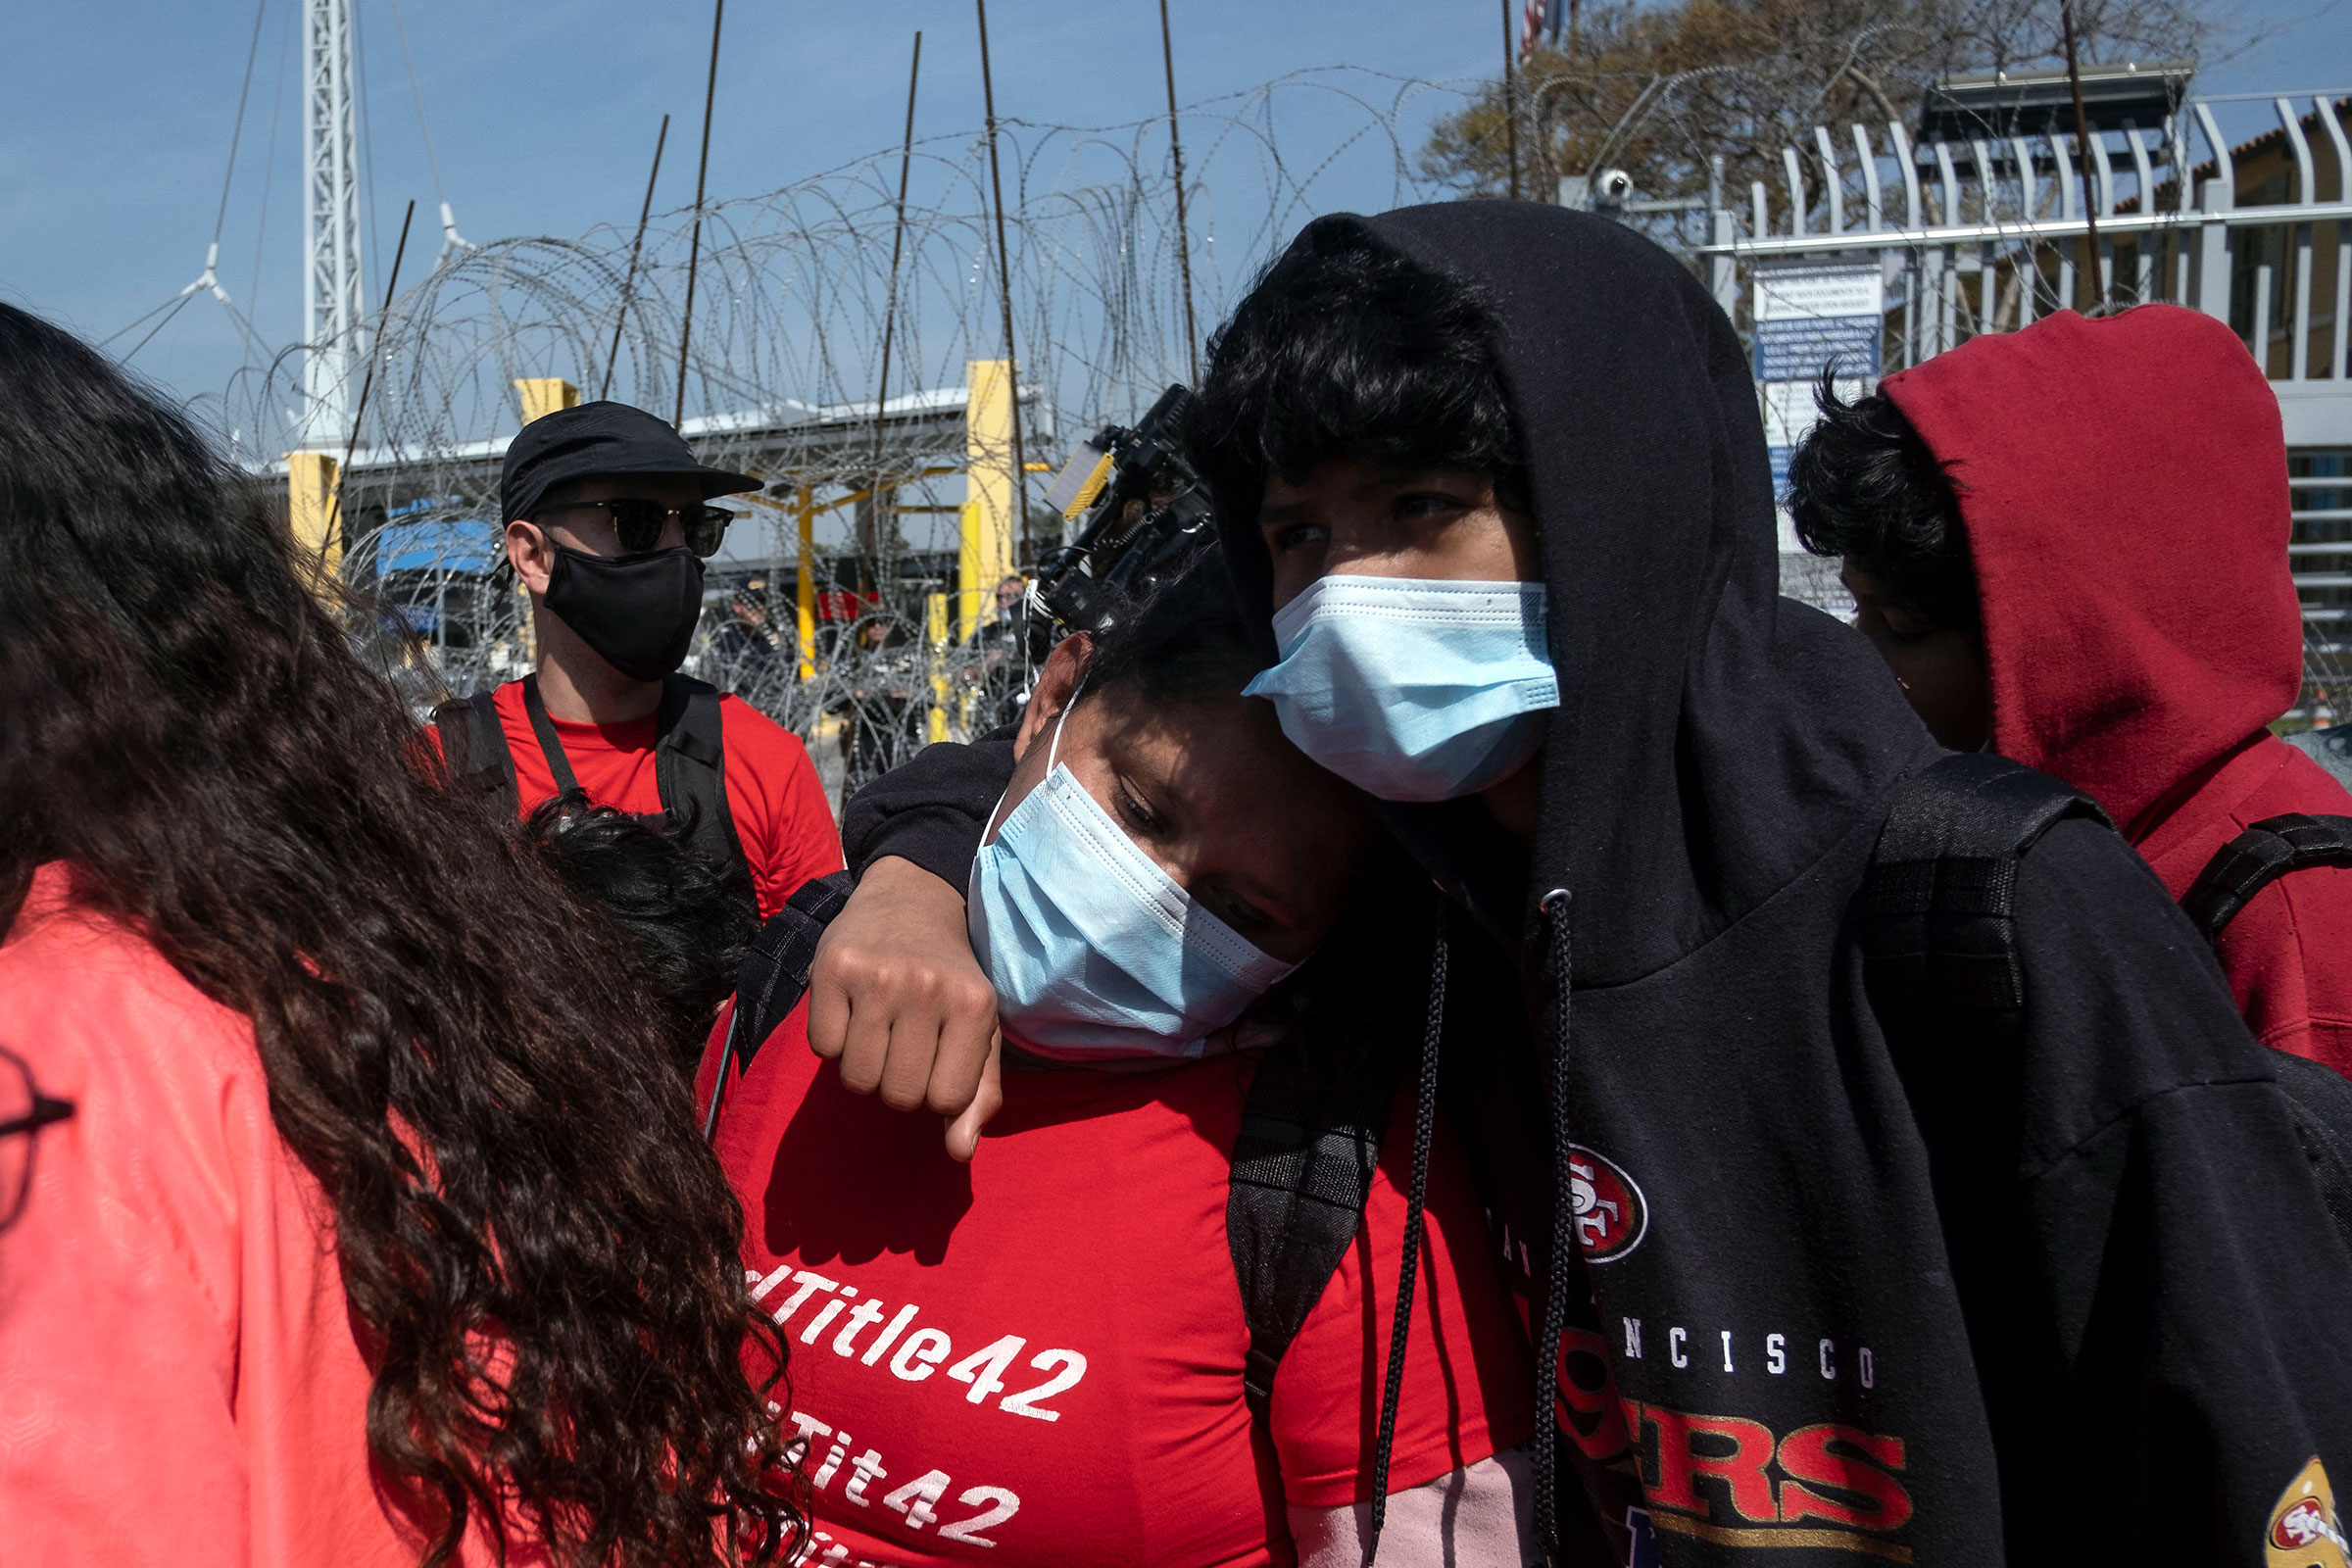 Asylum seekers react after been rejected at the border during a protest against Title 42 policy on the Mexican side of the San Ysidro Crossing port in Tijuana, Baja California state, Mexico, on March 21, 2022. (Guillermo Arias—AFP/Getty Images)